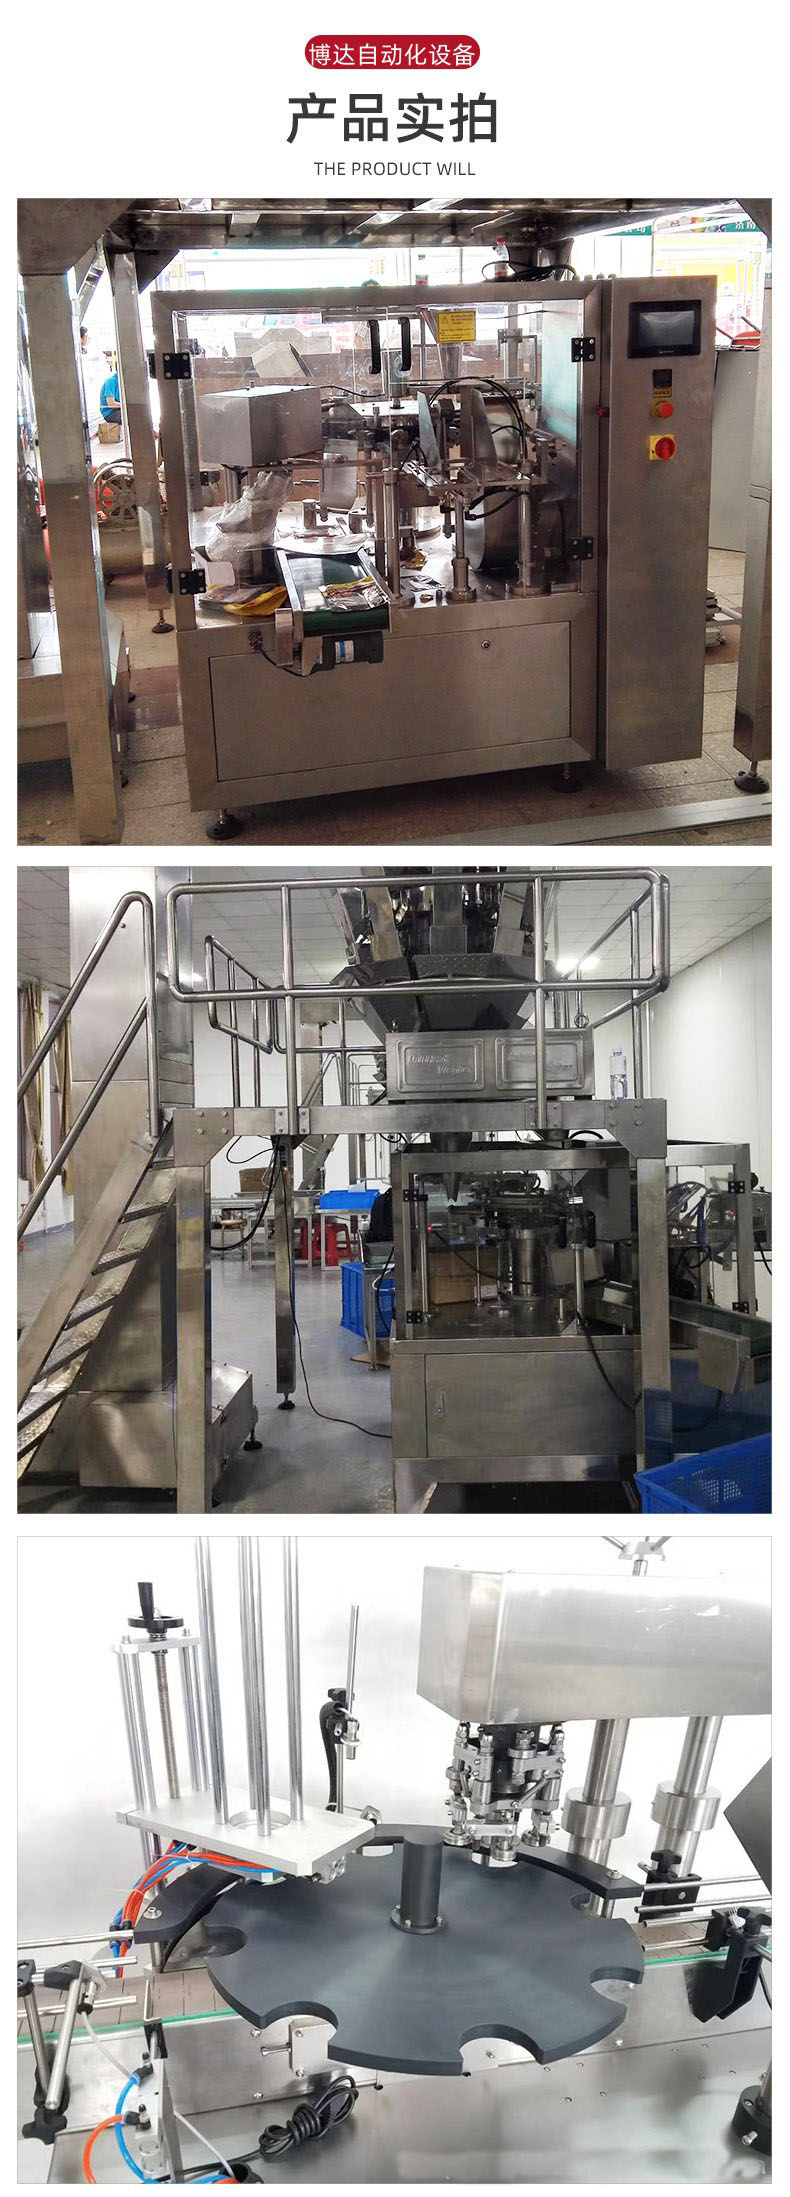 Boda concrete coating cement powder packaging machine weighing bag packaging production line can be customized